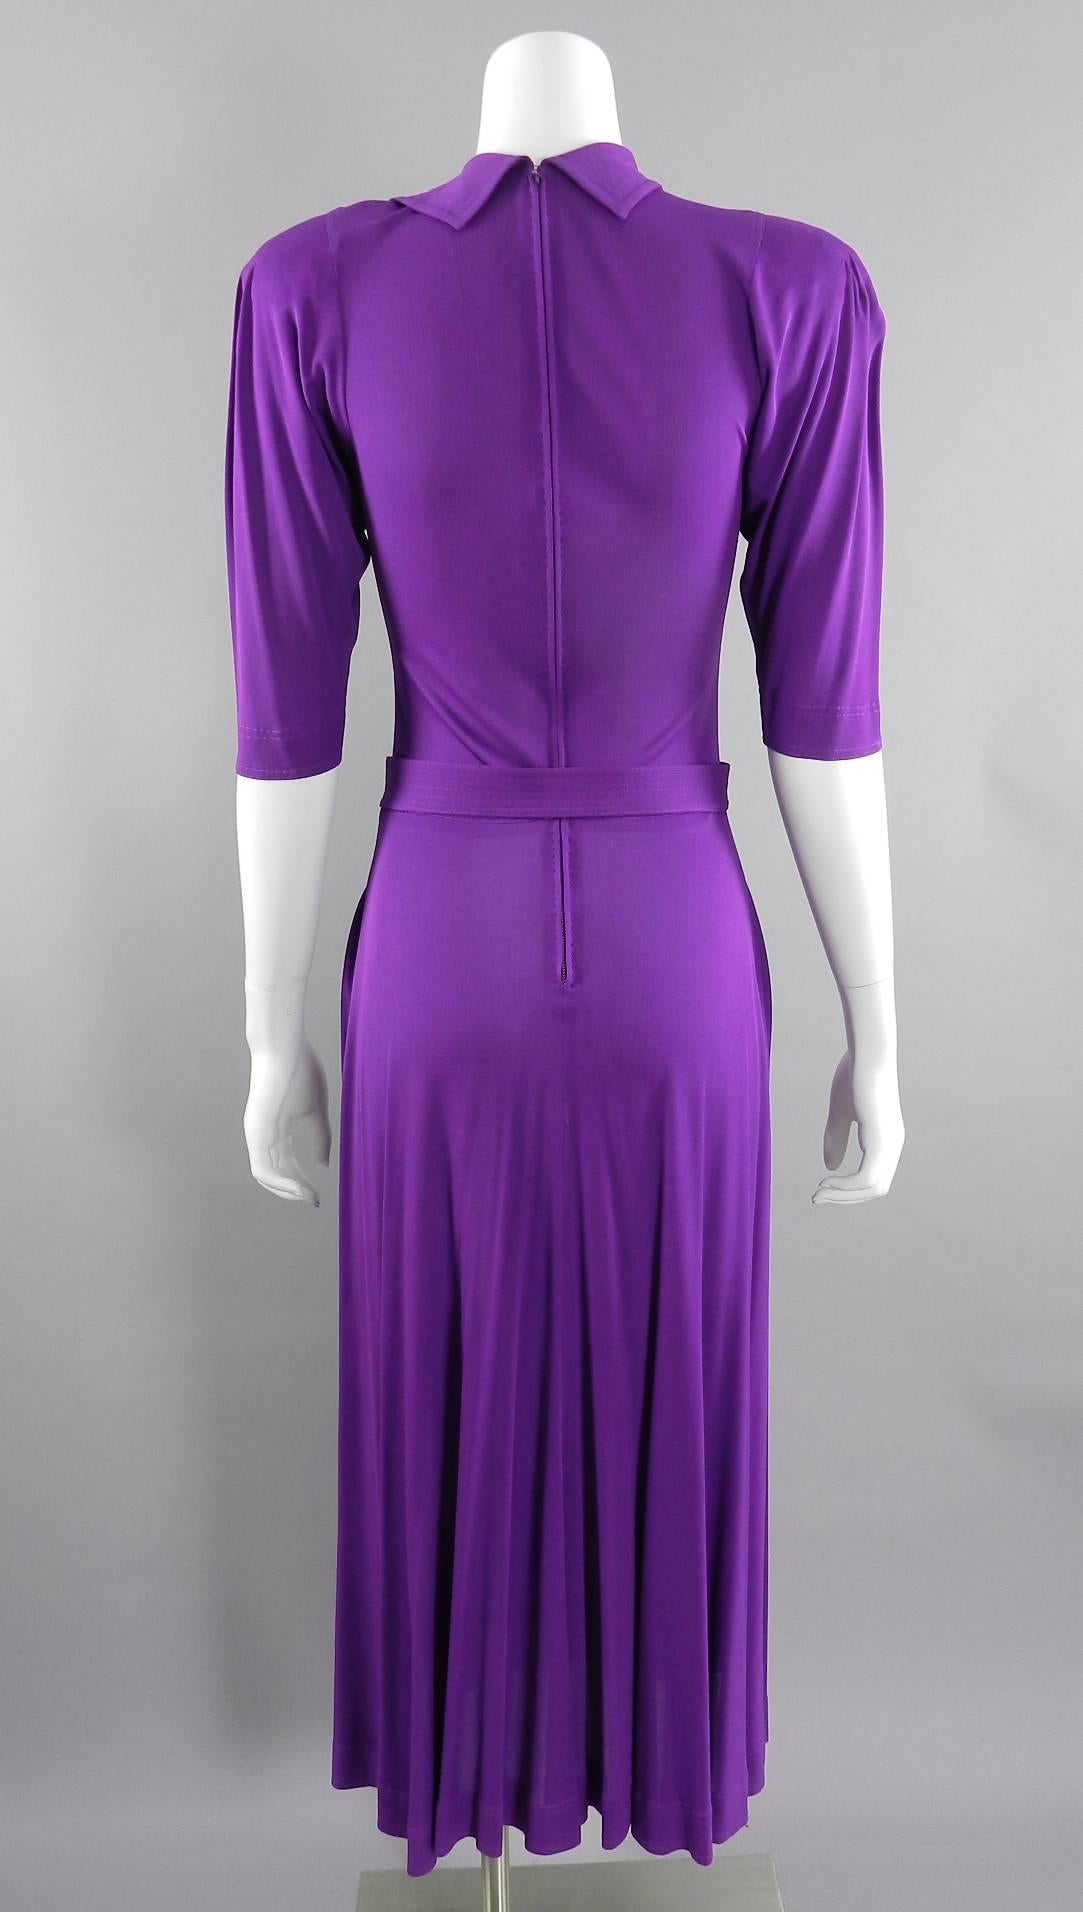 Jean Muir vintage circa 1970's purple jersey dress with belt. 1930's inspired design with pintucked shoulder detail, topstitched collar, centre metal zipper at back. excellent condition - drycleaned. Approximate size USA 6 / 8. To fit 34